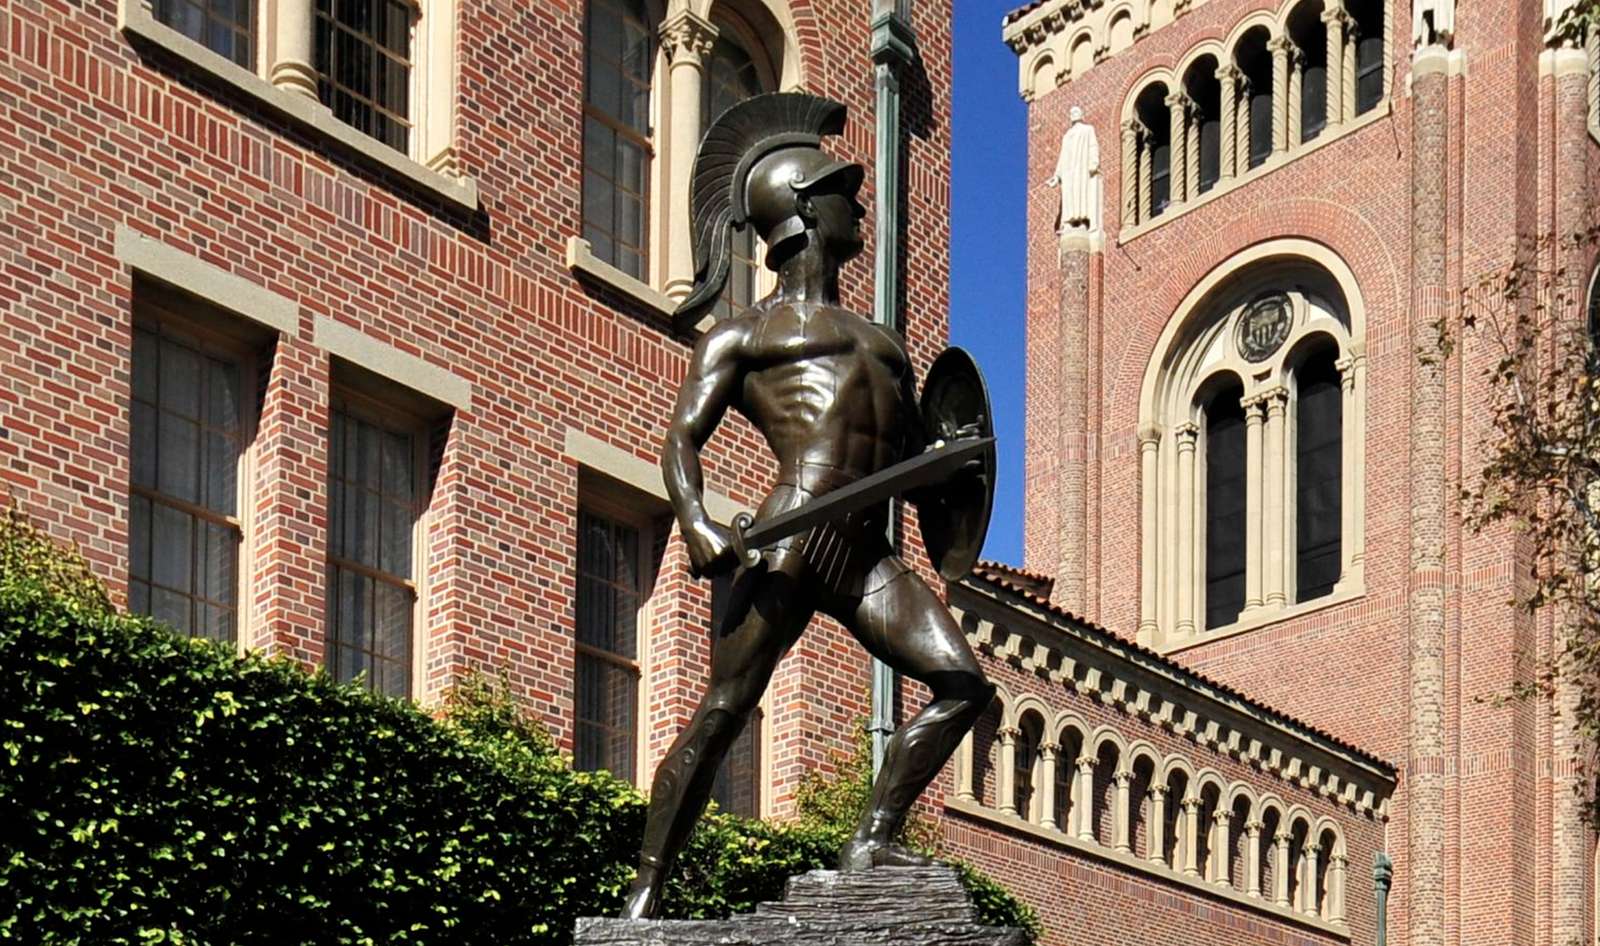 Enigma Tommy Trojan puzzle online